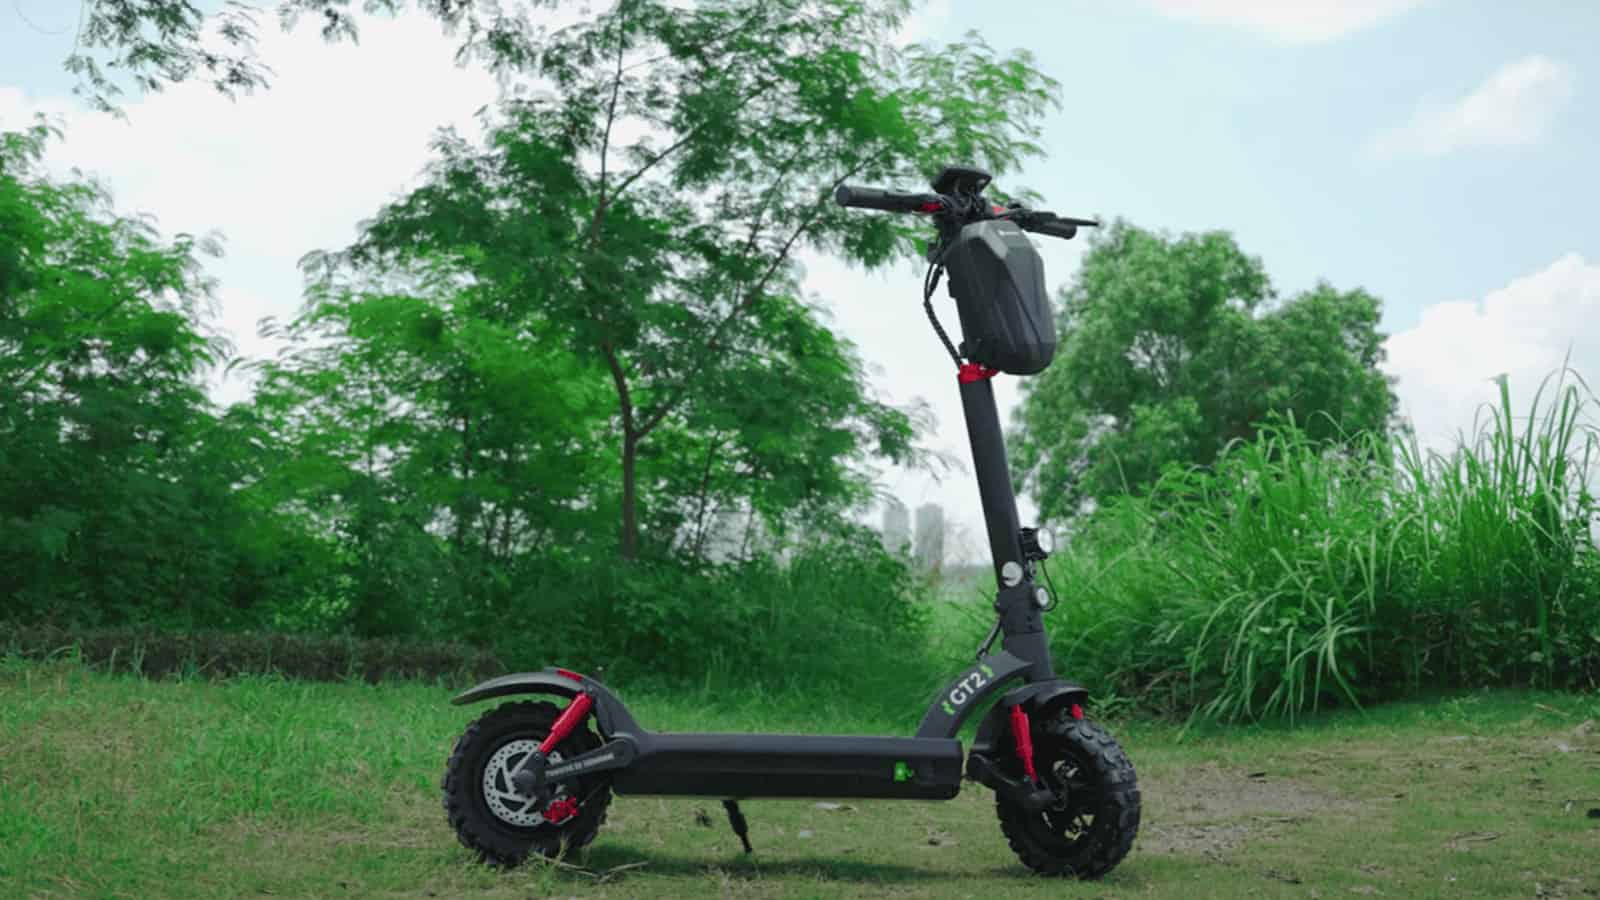 ISINWHEEL electric scooter for travel, but can you pack it to bring on a flight